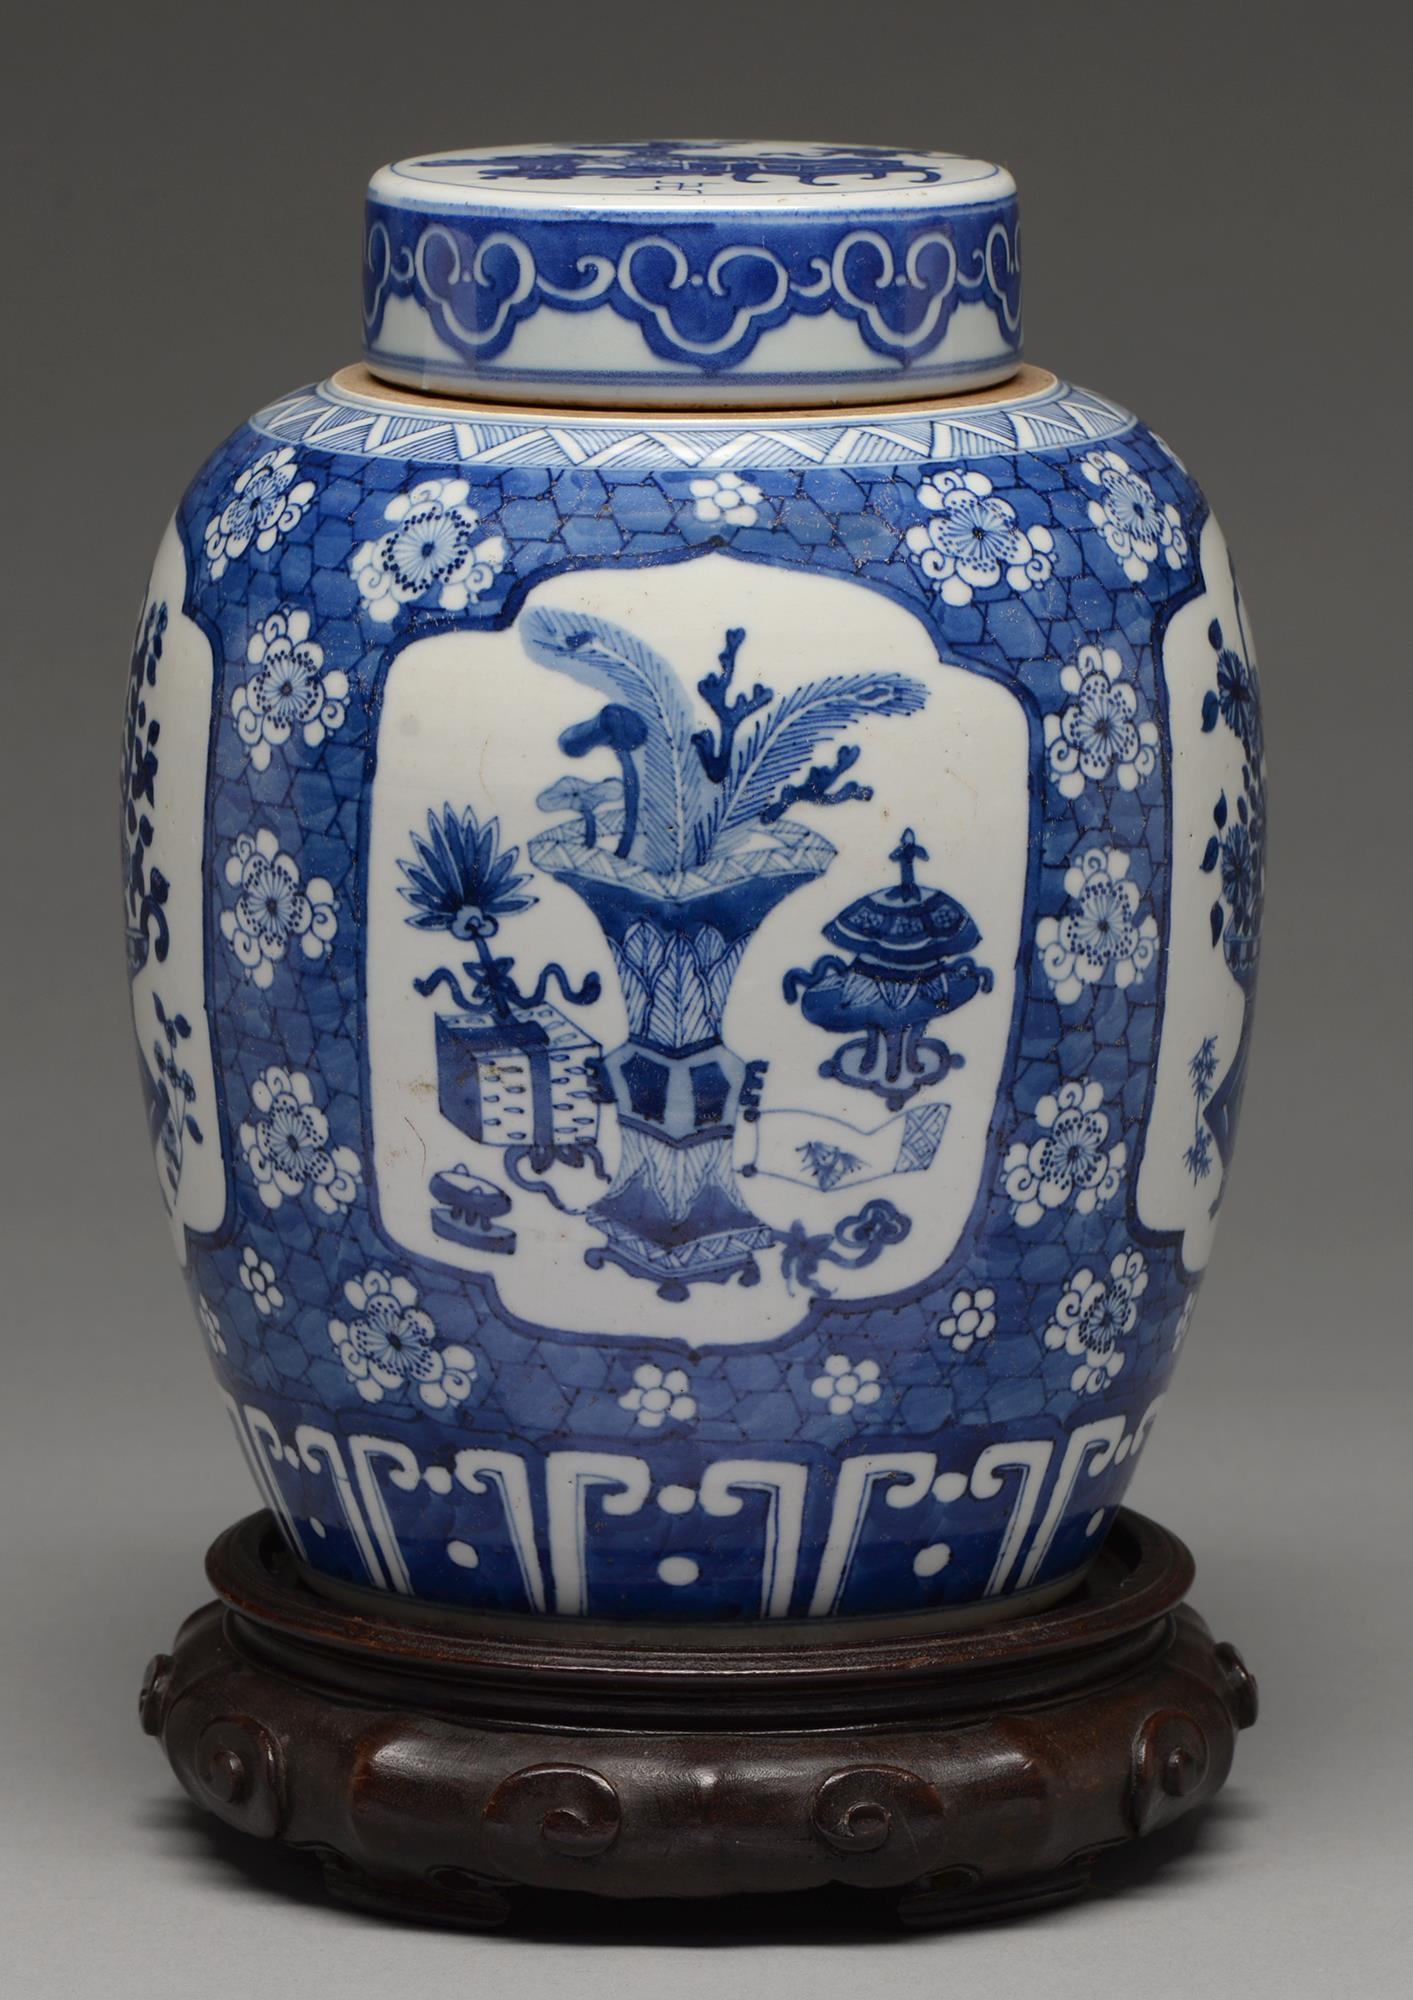 A Chinese blue and white jar and cover, late 19th c, painted with a basket of flowers or precious